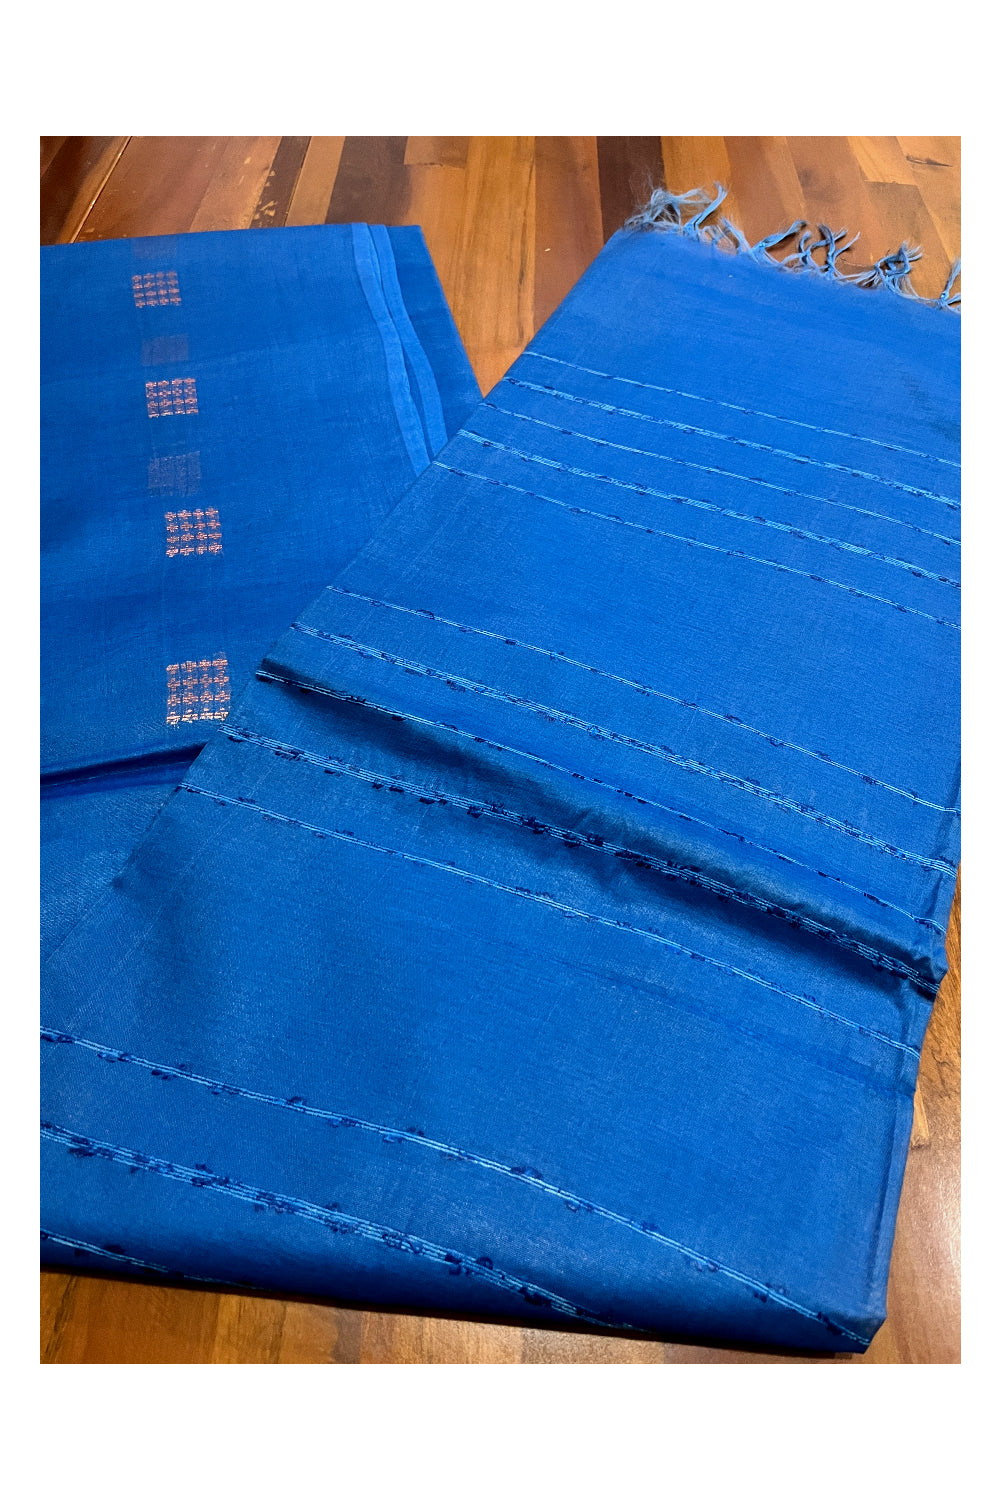 Southloom Cotton Blue Saree with Copper Butta Works on Body